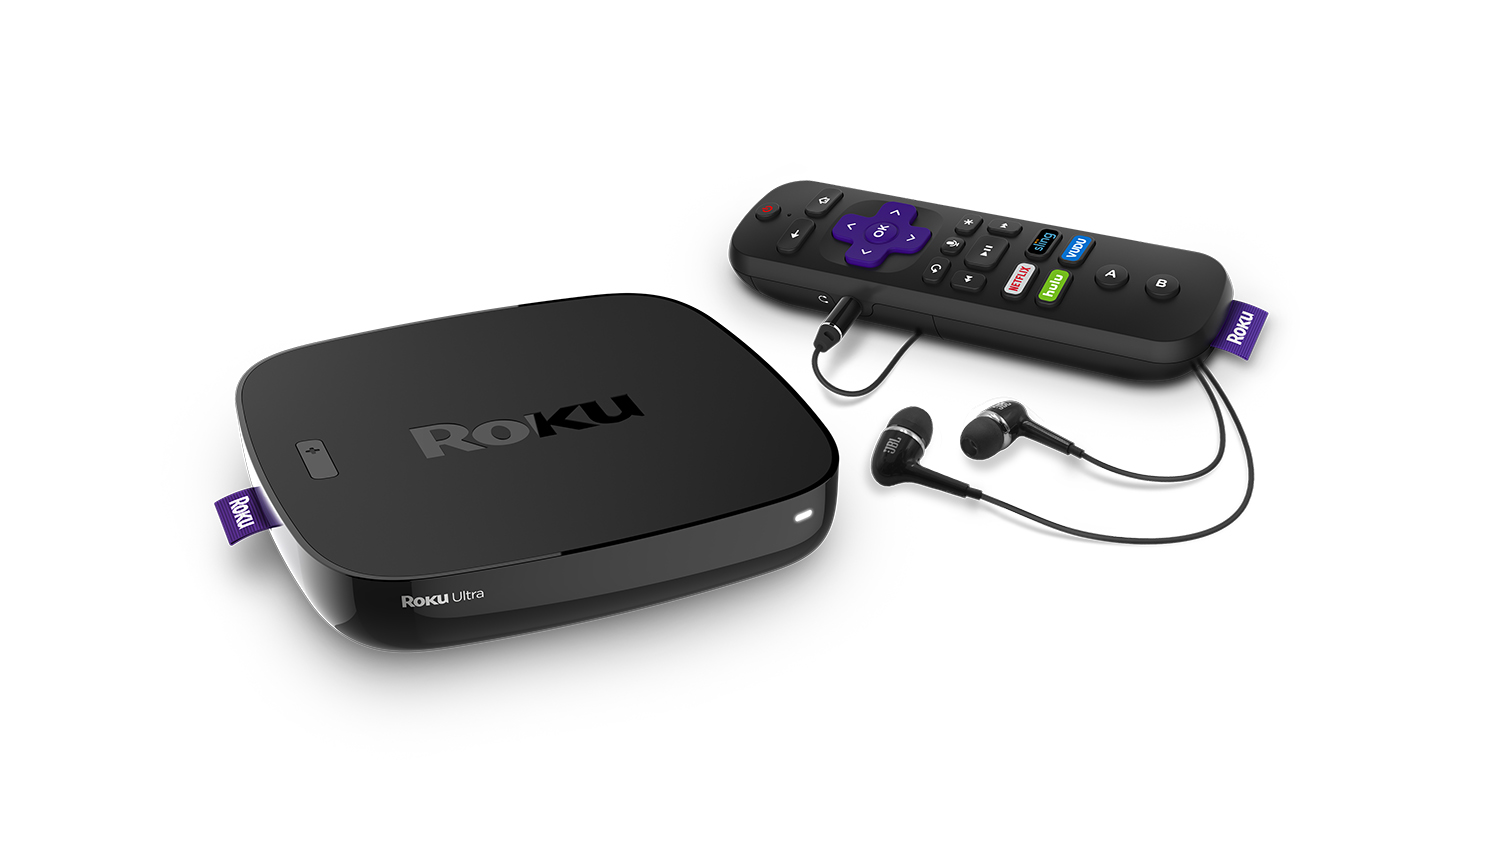 Roku Ultra 4K HDR Streaming Player (2018) with JBL headphones - image 1 of 7